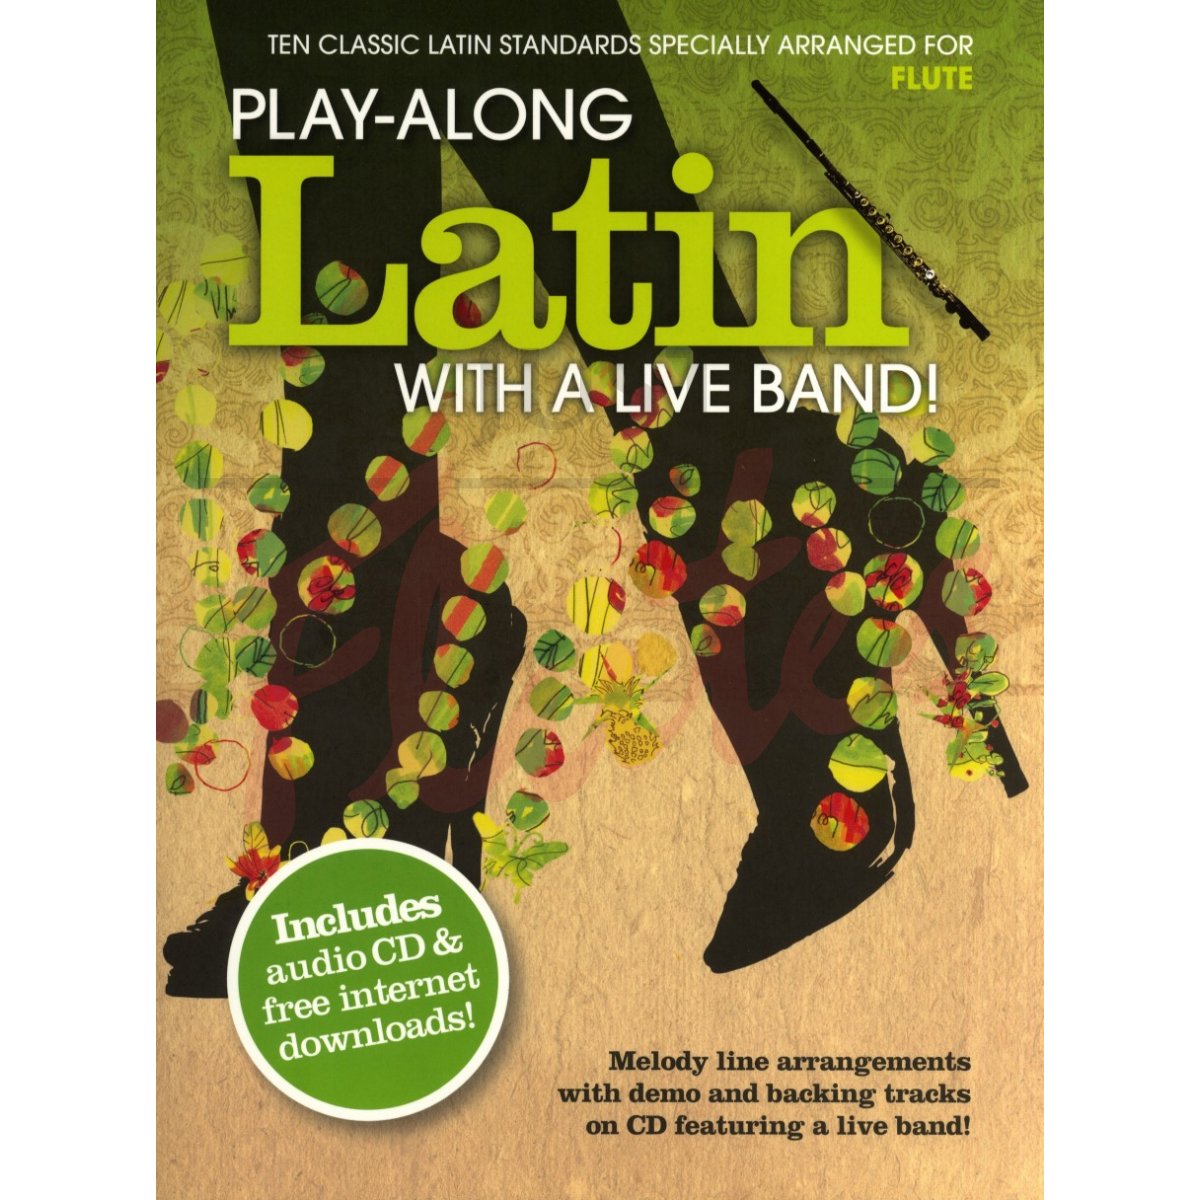 Play-Along Latin With A Live Band! [Flute]